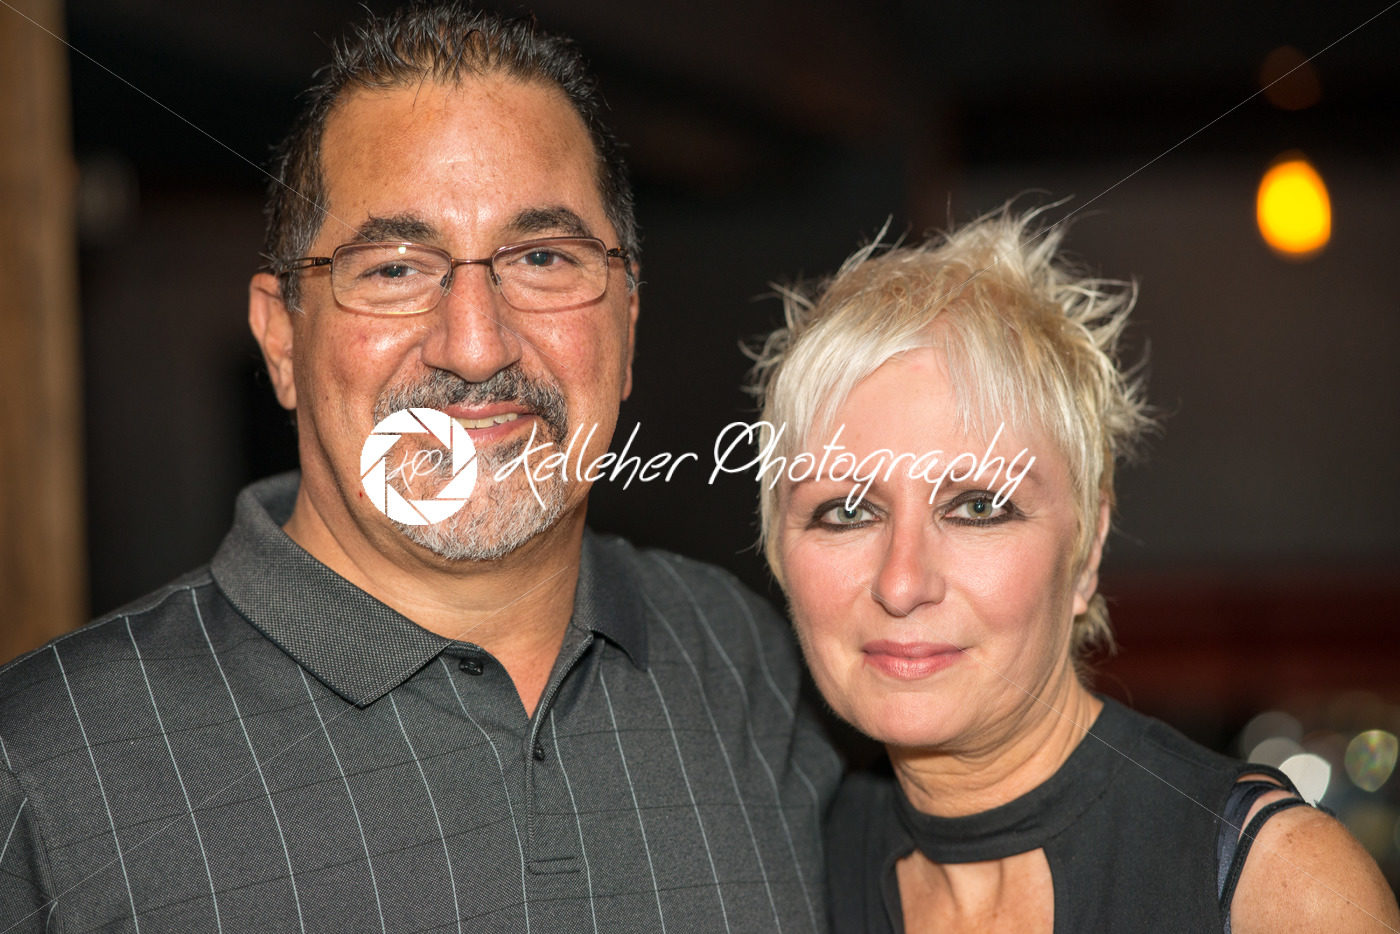 VALLEY FORGE CASINO, KING OF PRUSSIA, PA – JULY 15: Kendall’s Crusade fundraising event to raise awareness of Arteriovenus Malformations AVM on July 15, 2017 - Kelleher Photography Store